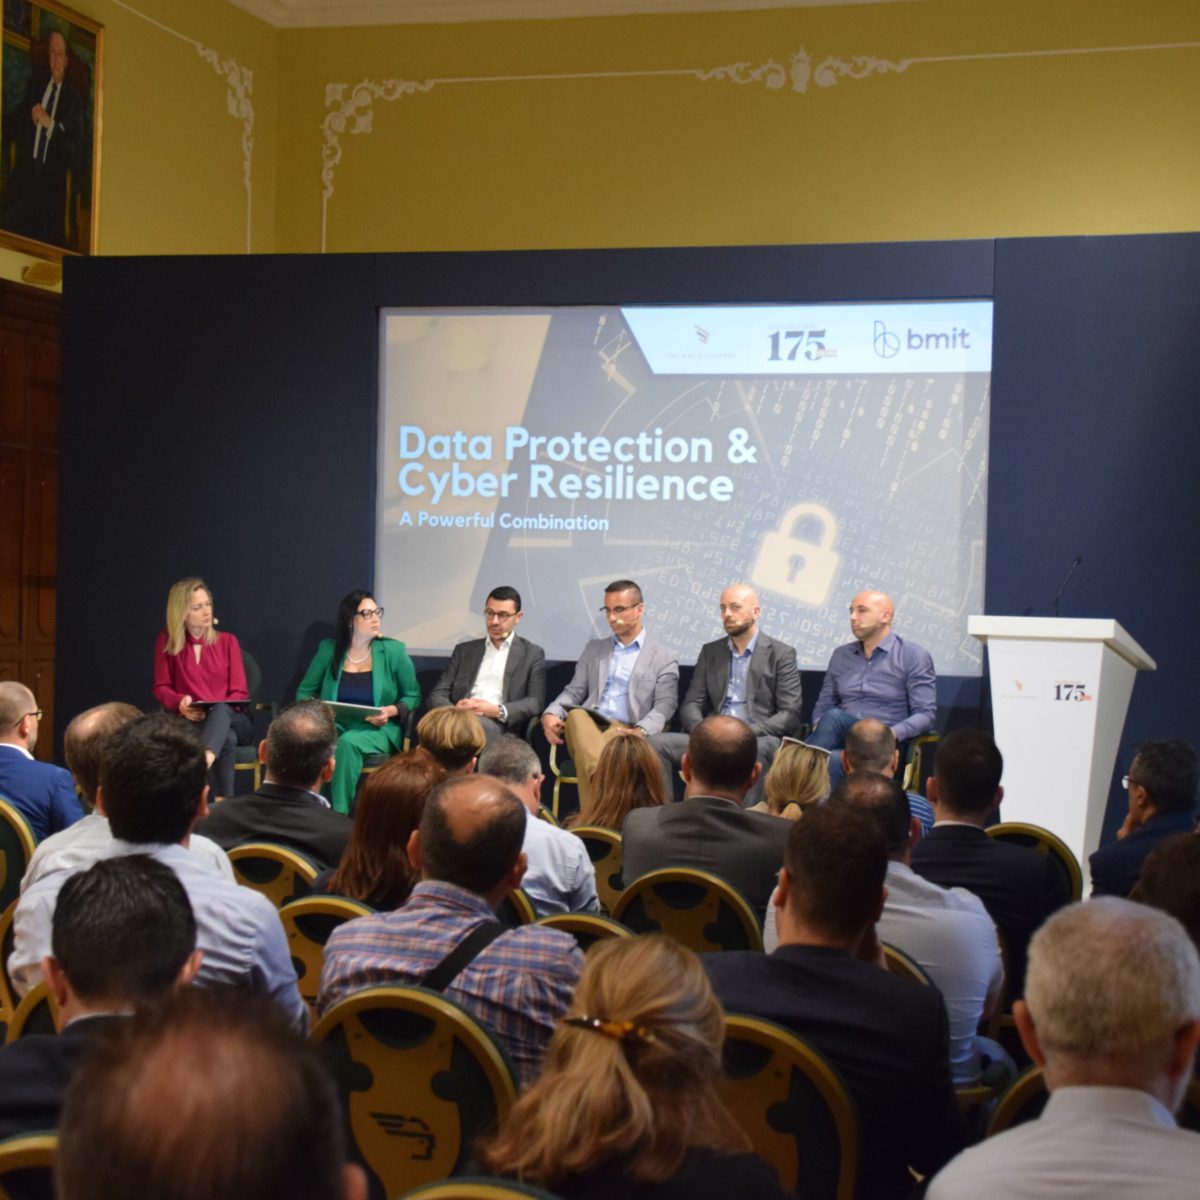 Panel at the Data Protection and Cyber Resilience: A Powerful Combination event of the Malta Chamber